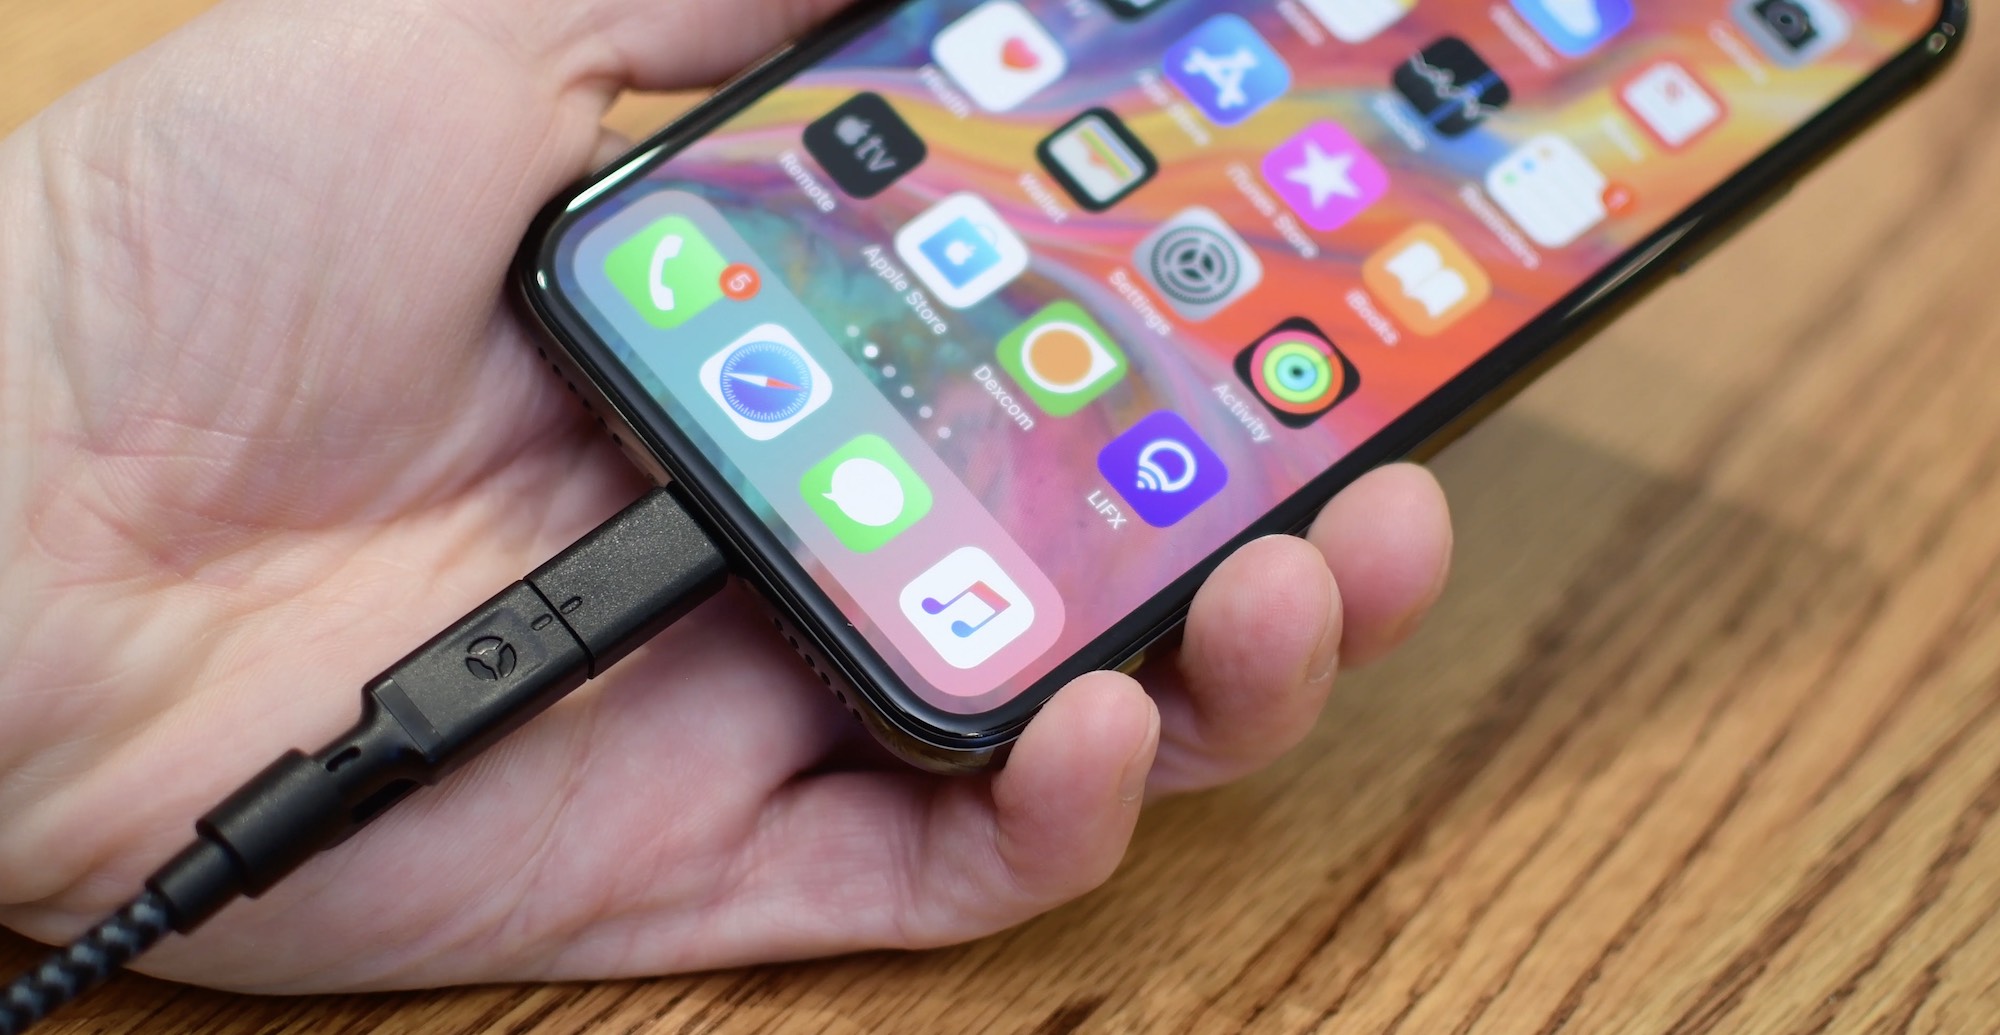 A close up of an iPhone X with a cable being plugged into the Lightning port